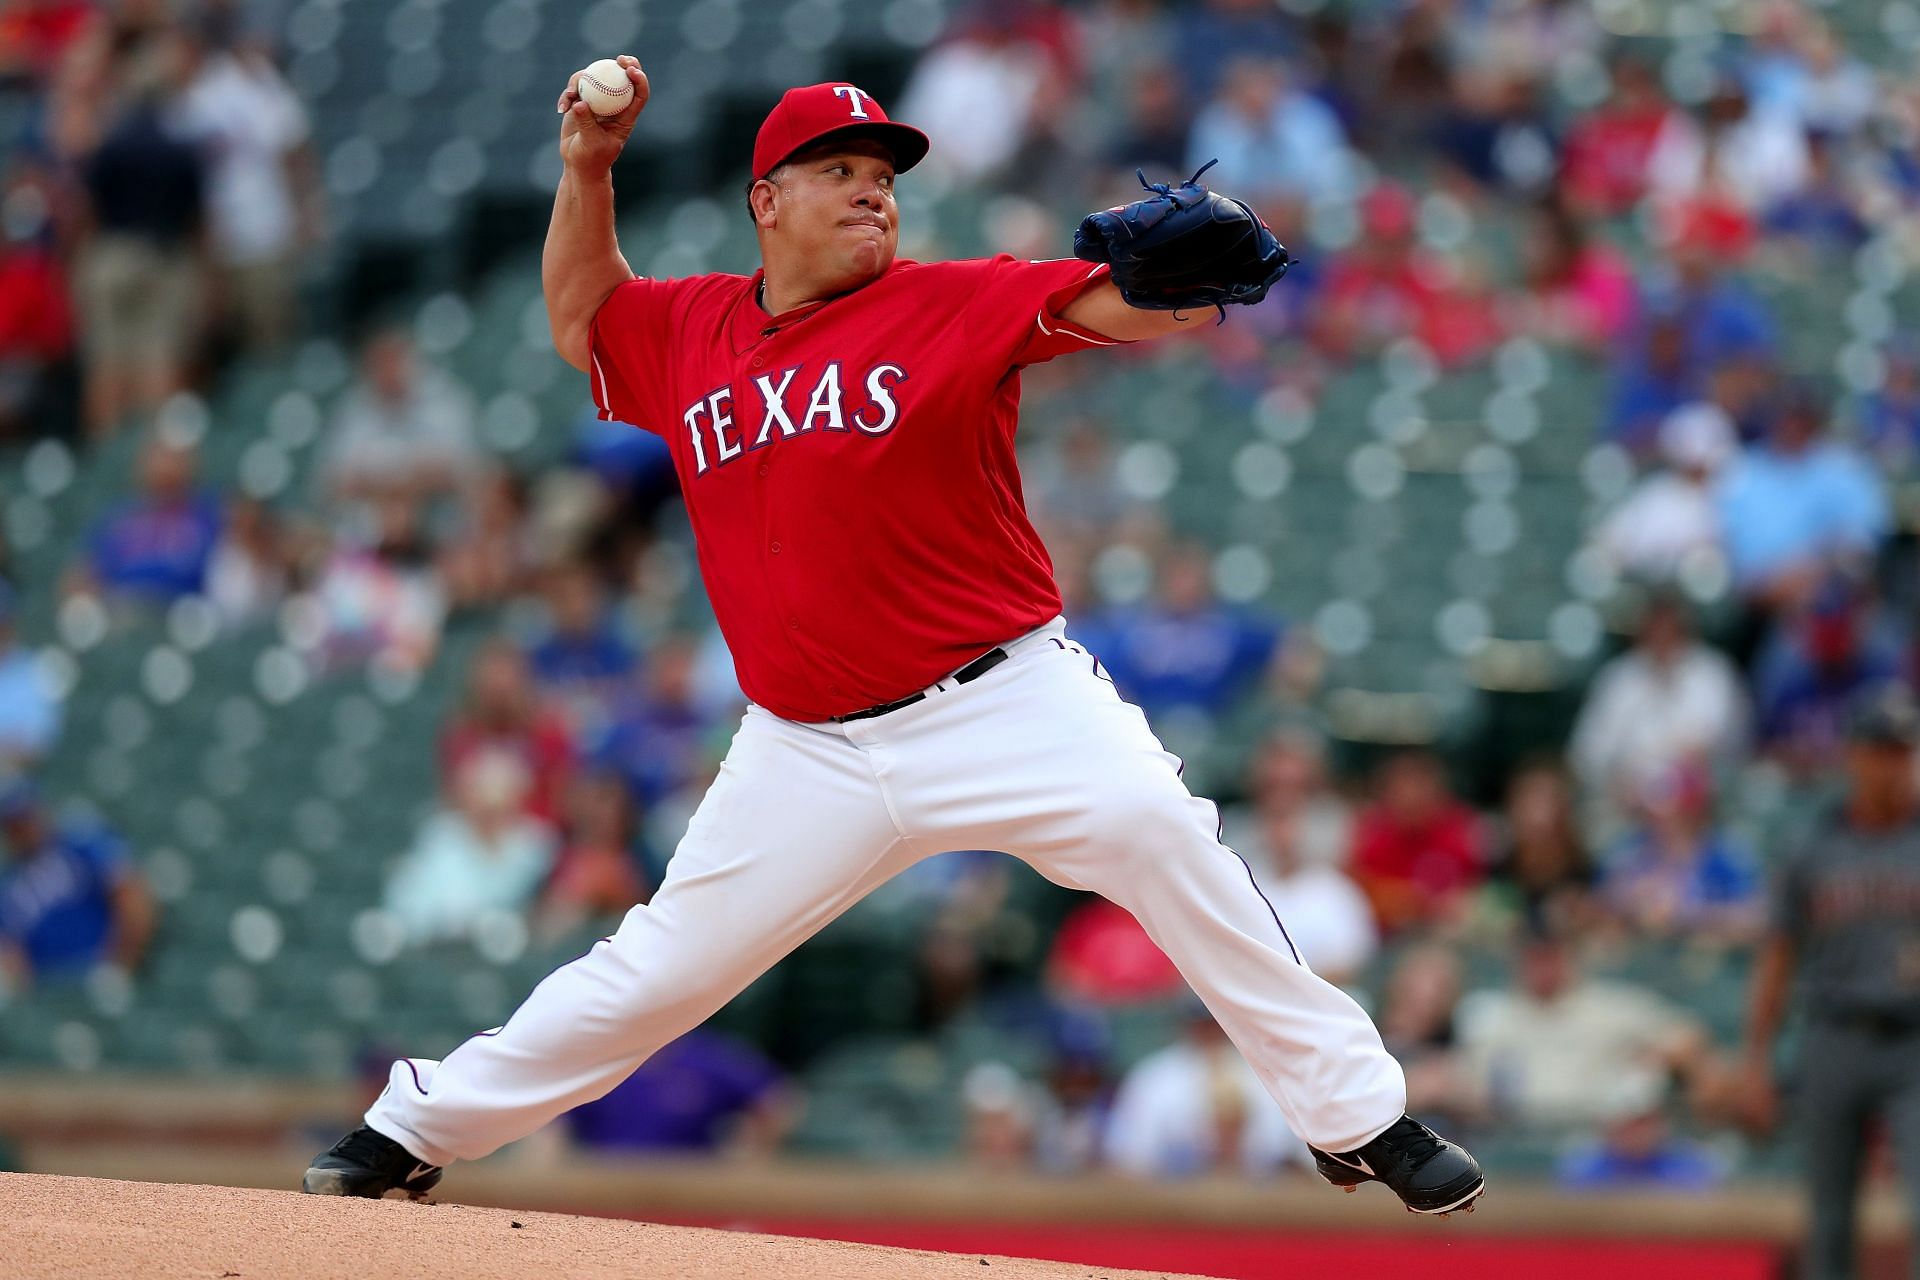 New Met and medical miracle Bartolo Colon gets another chance to